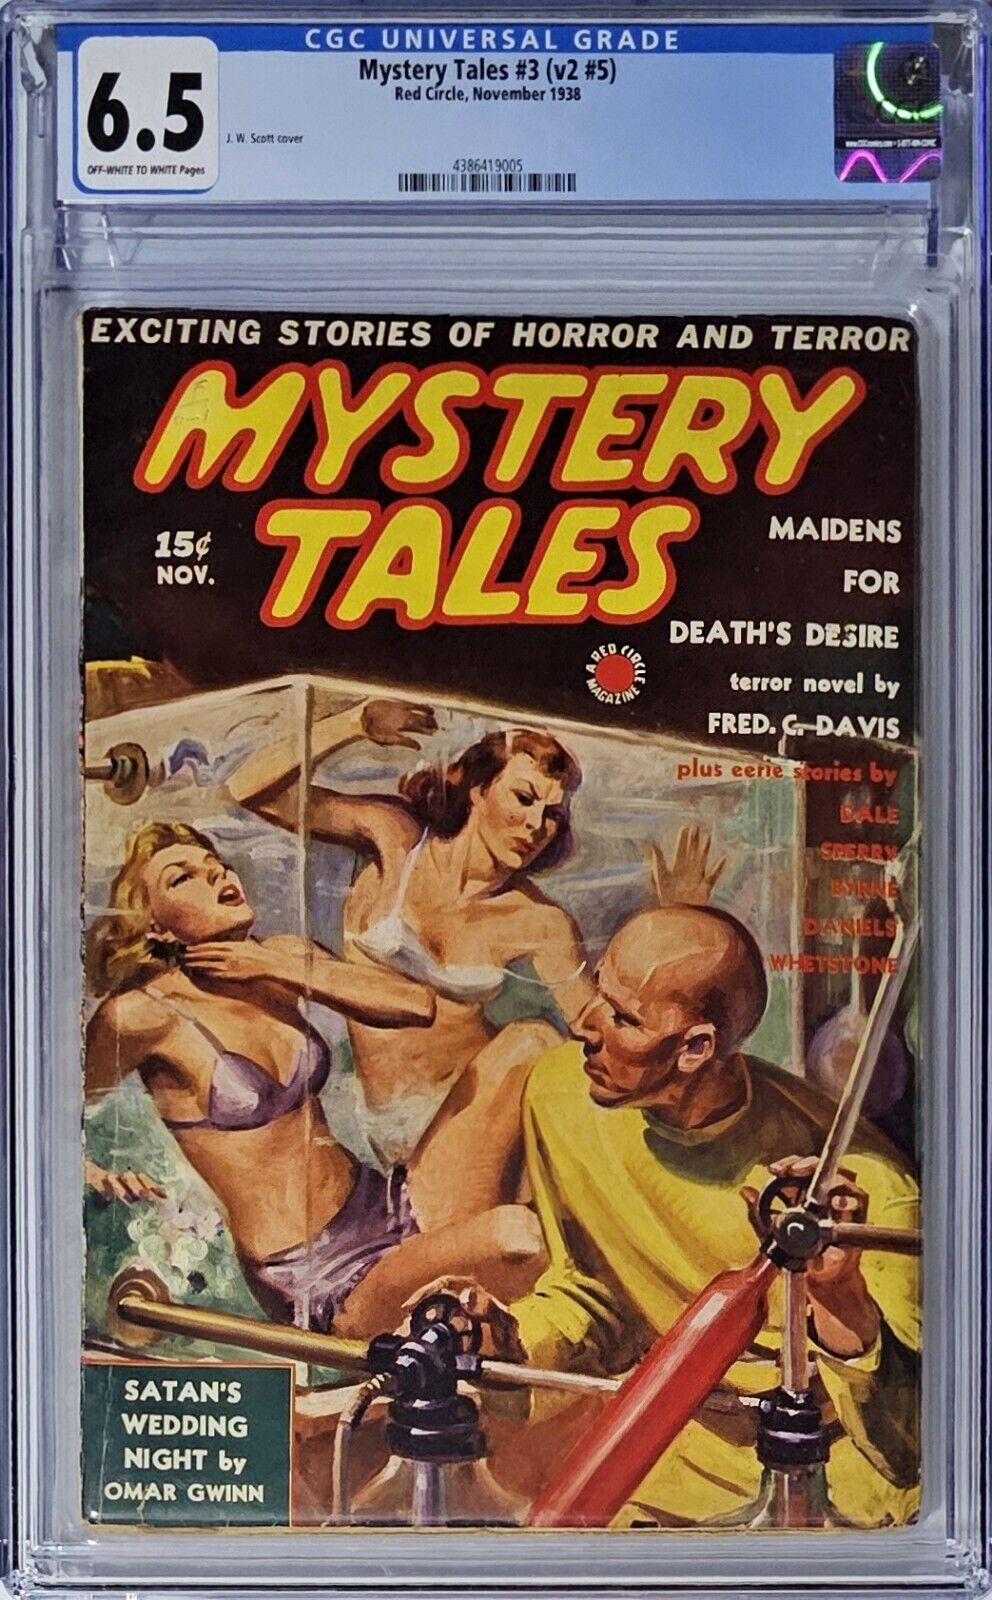 Mystery Tales #3 (v2 #5) November 1938 CGC 6.5 Red Circle Pulp Torture Cover